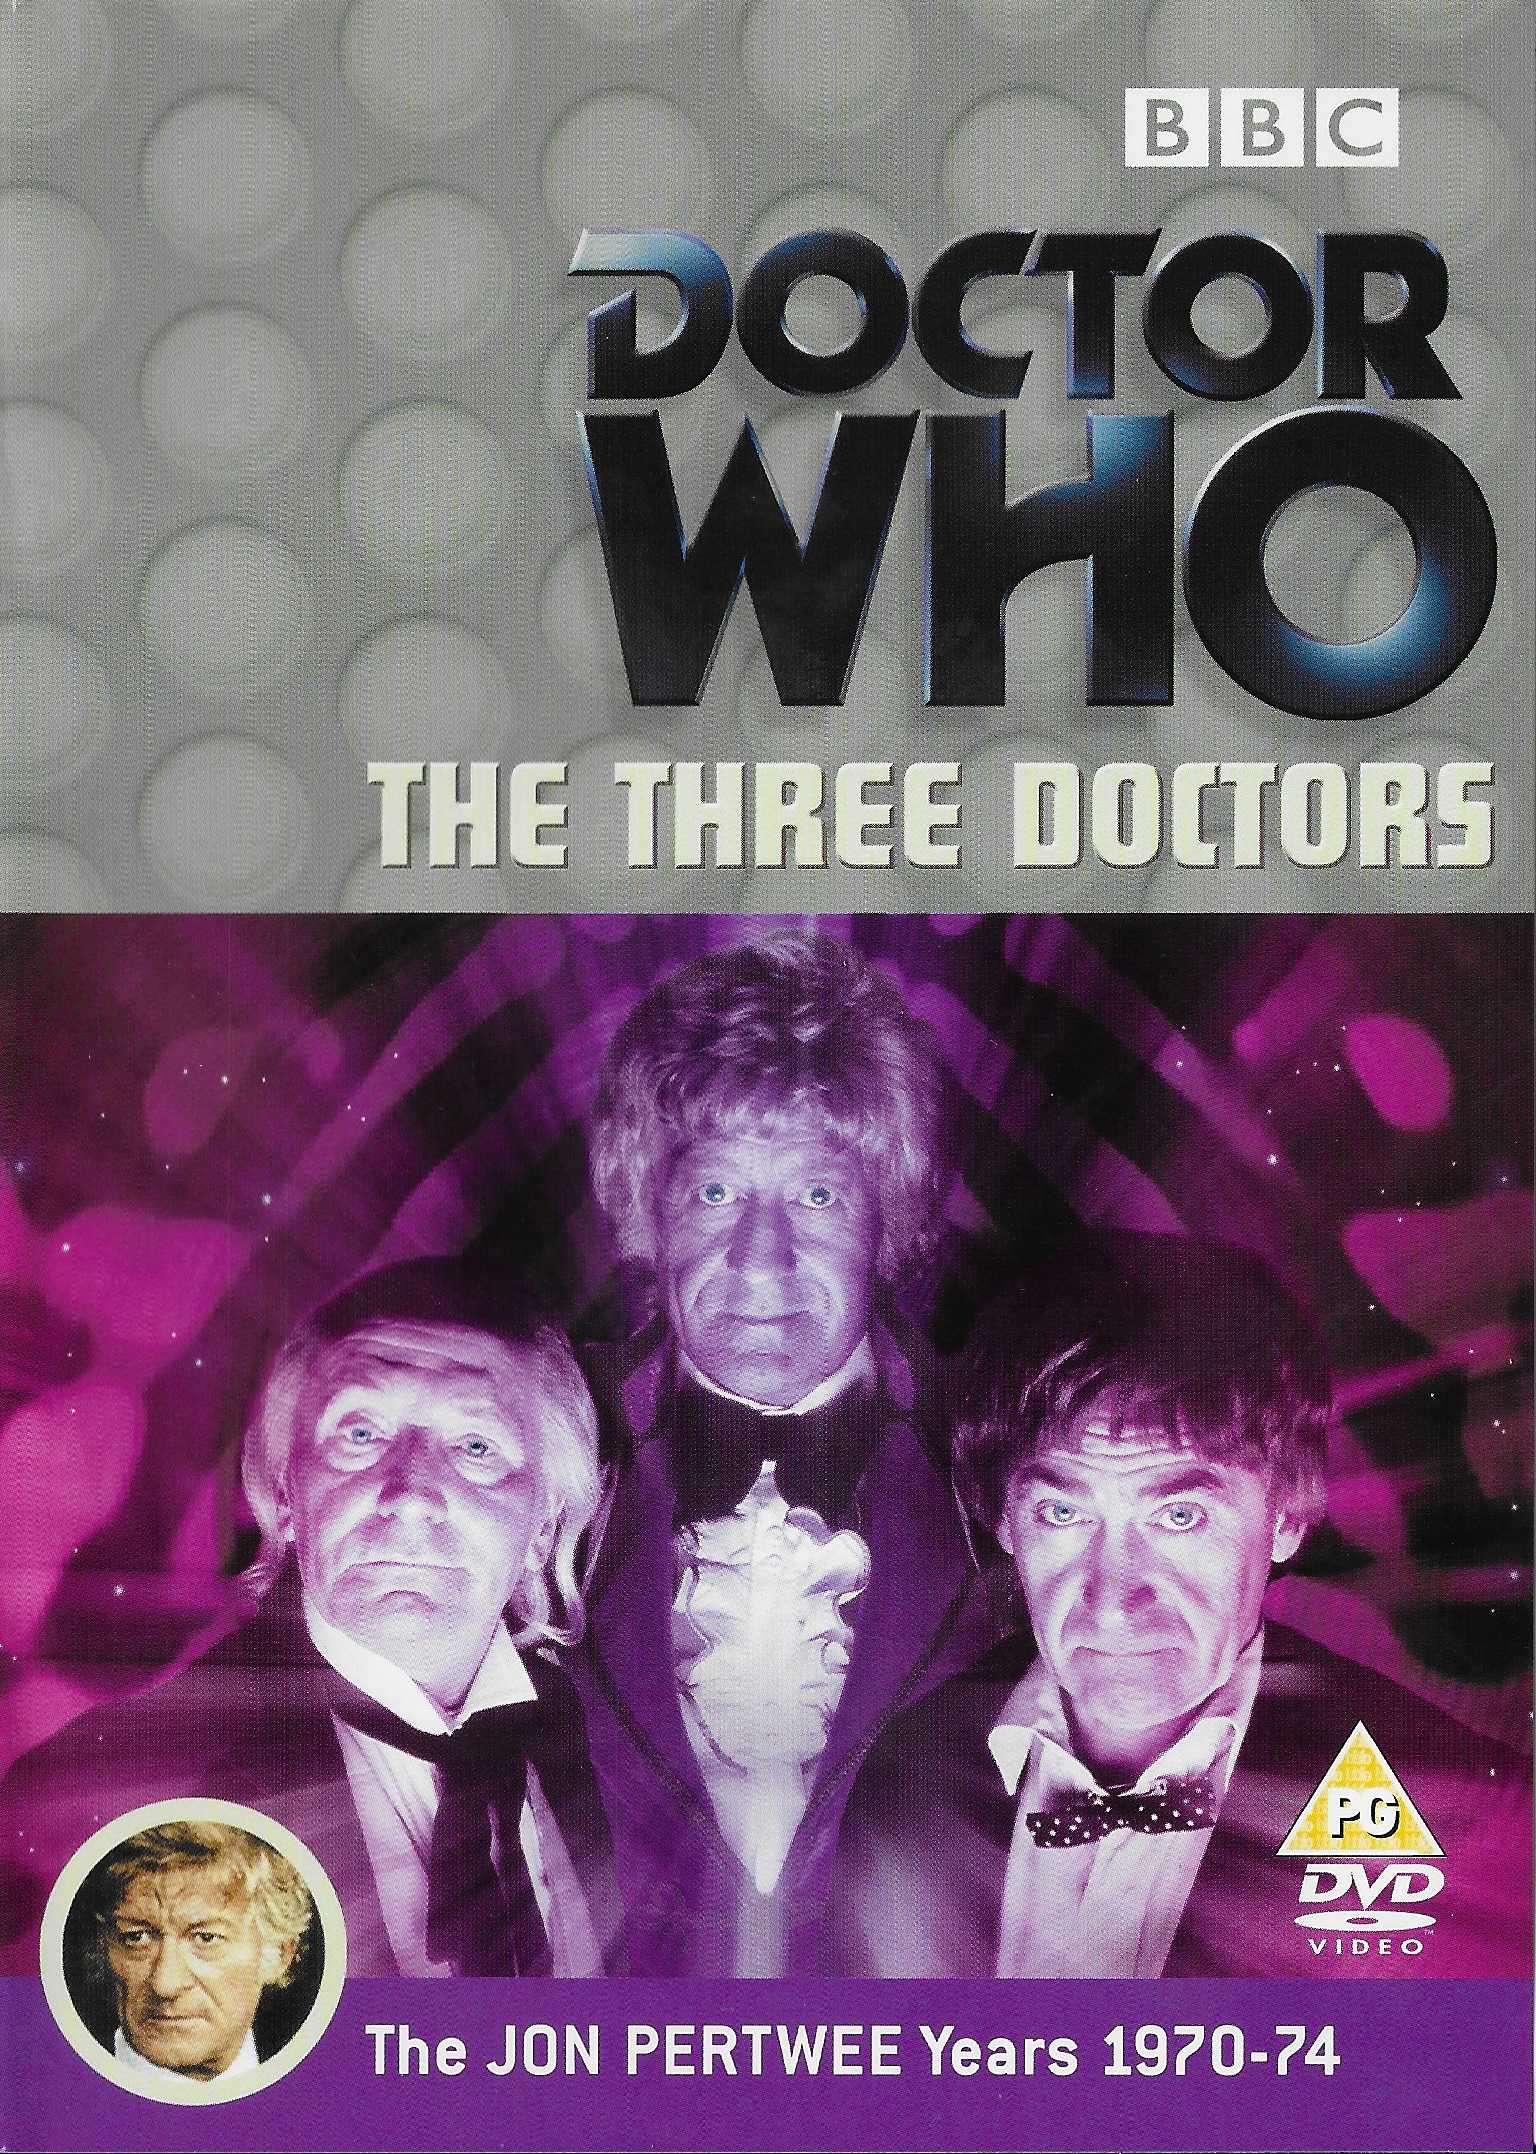 Picture of BBCDVD 1144 Doctor Who - The three doctors by artist Bob Baker / Dave Martin from the BBC records and Tapes library